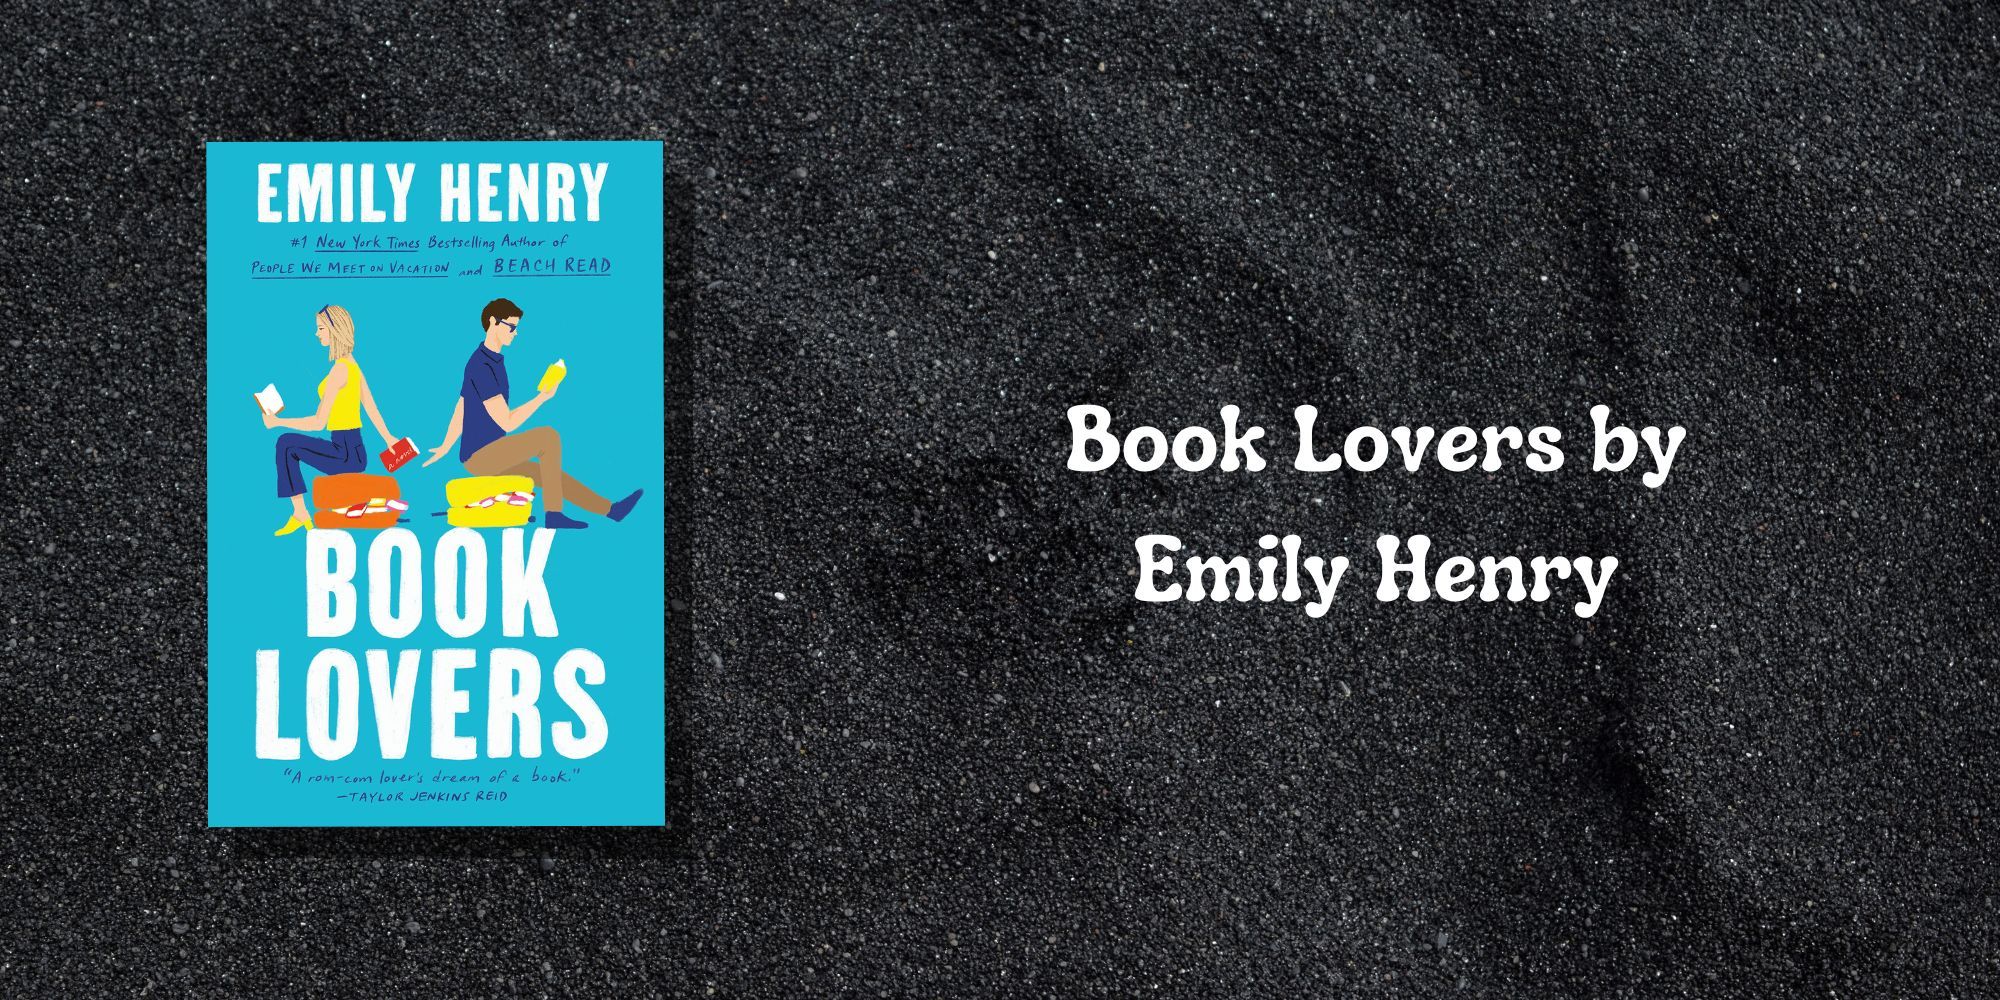 Book Lovers book cover by Emily Henry